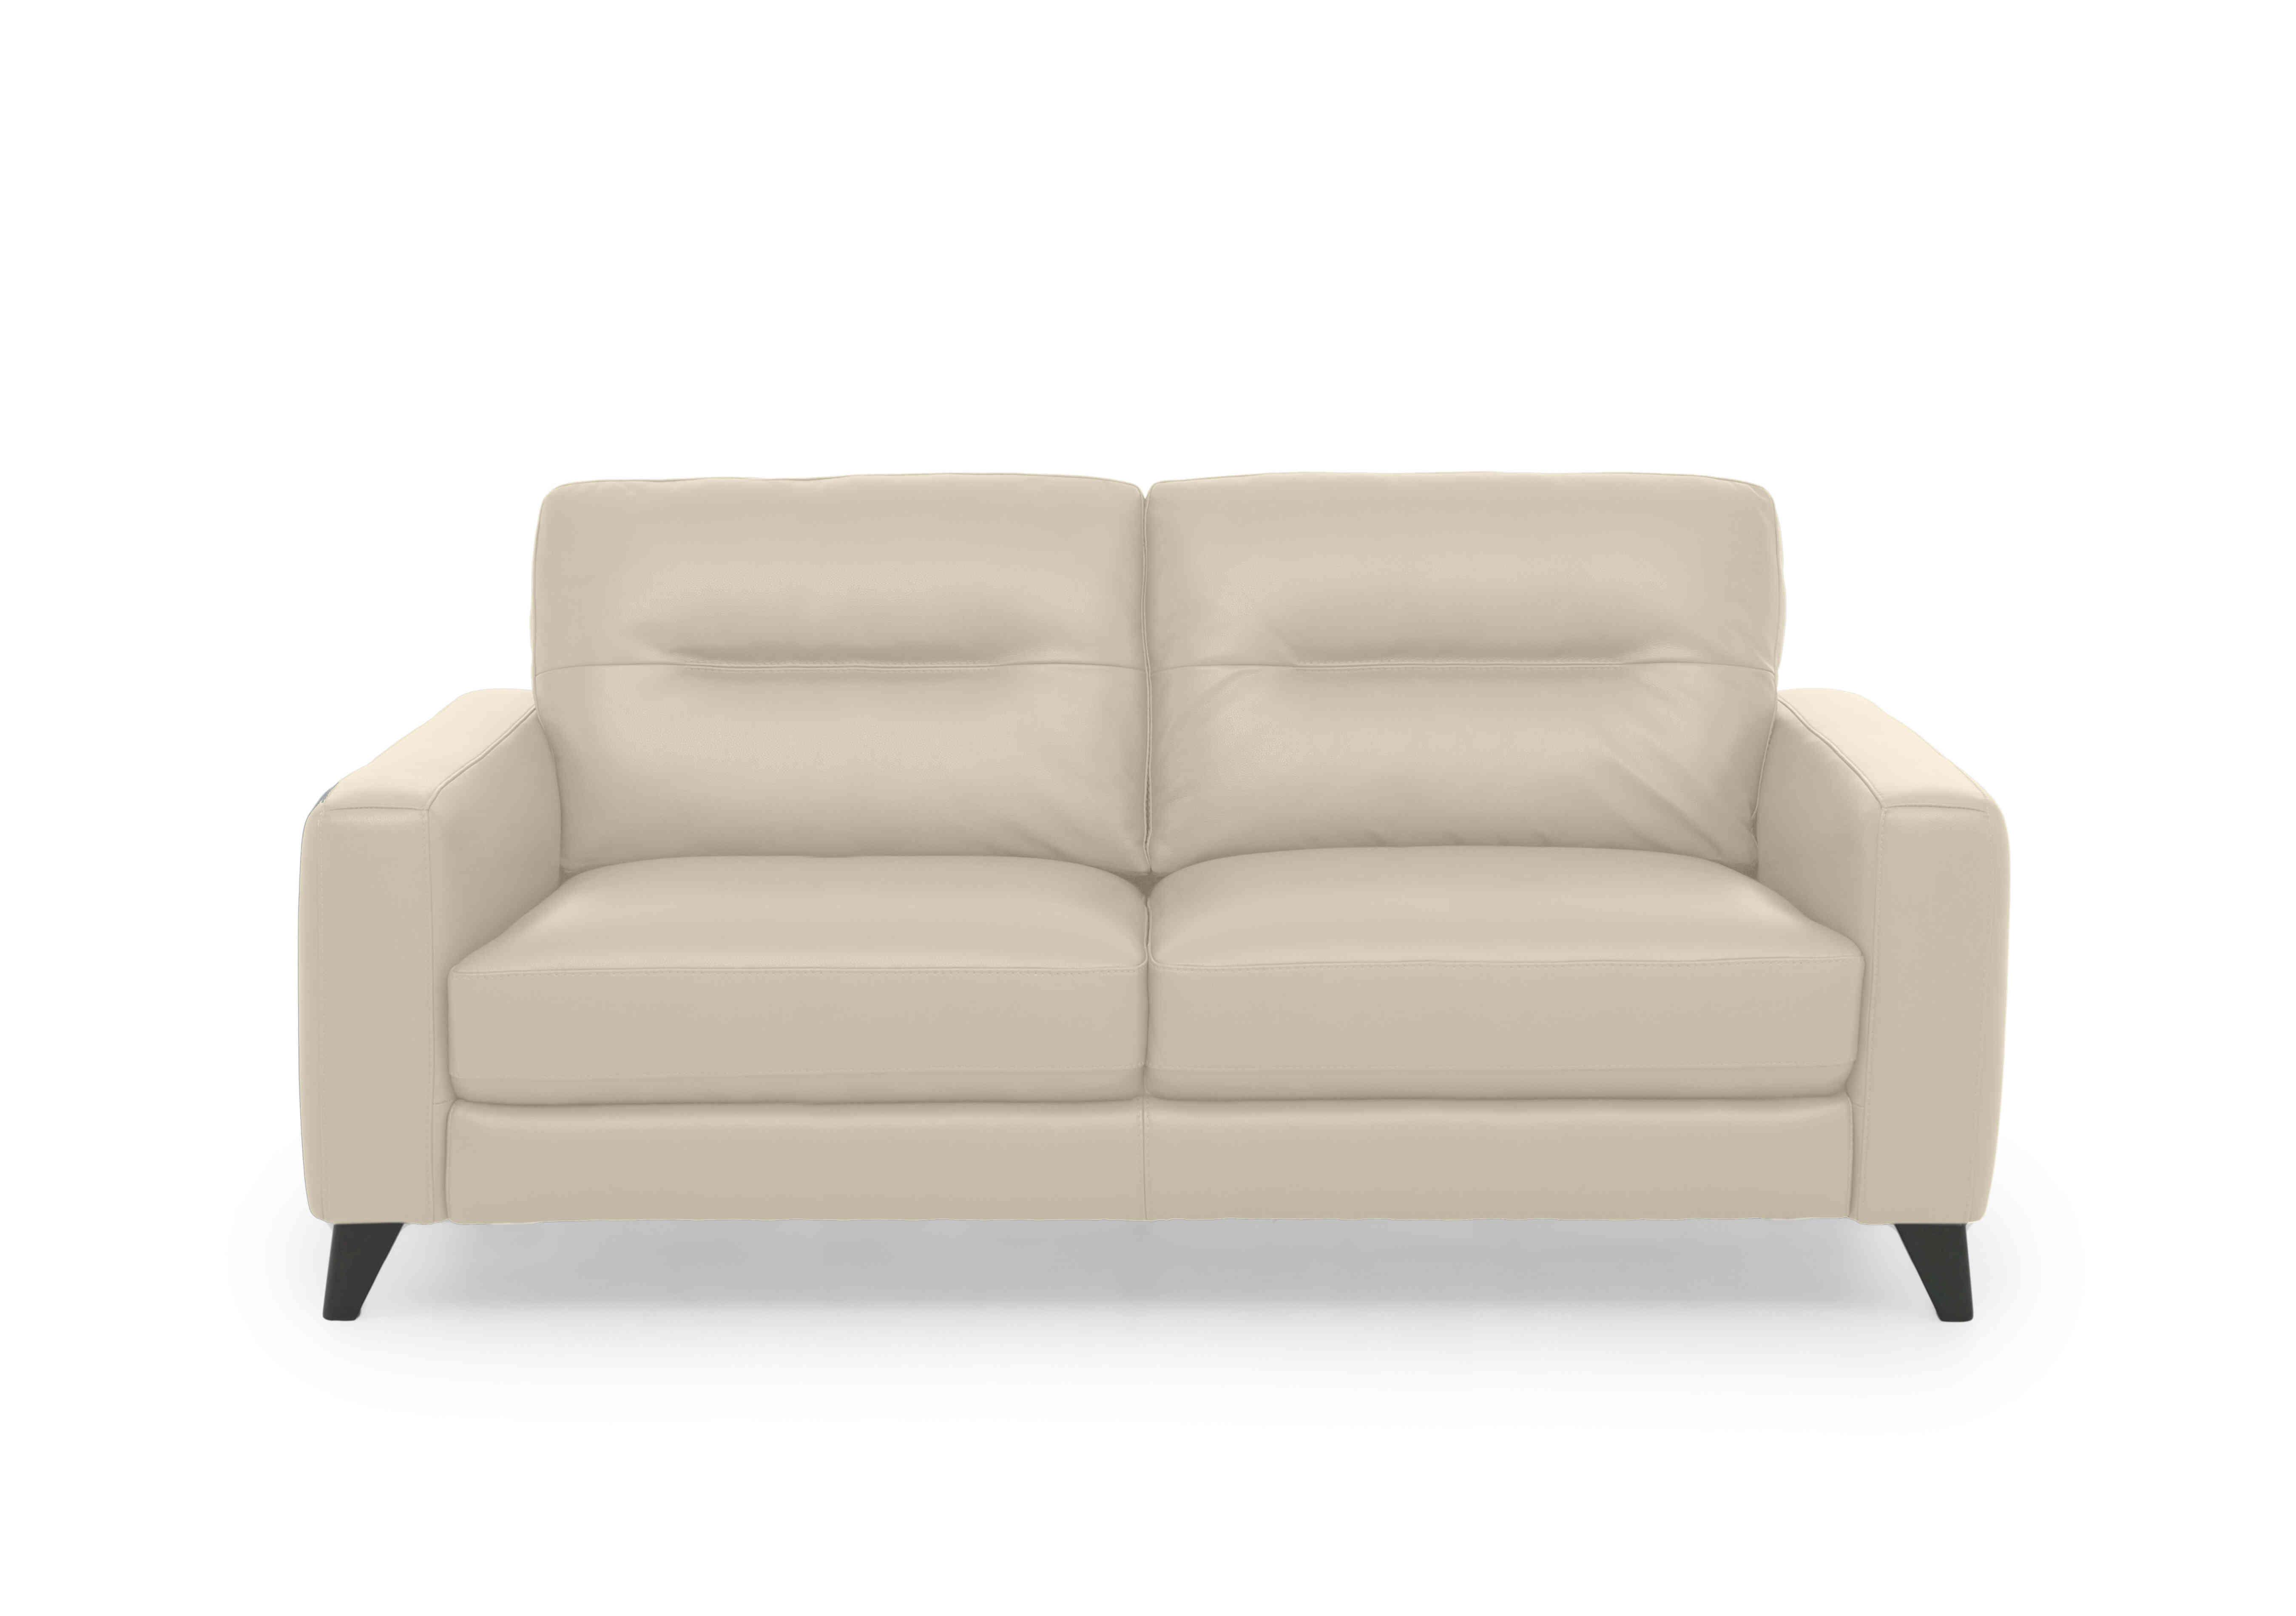 Jules 3 Seater Leather Sofa in Bv-862c Bisque on Furniture Village